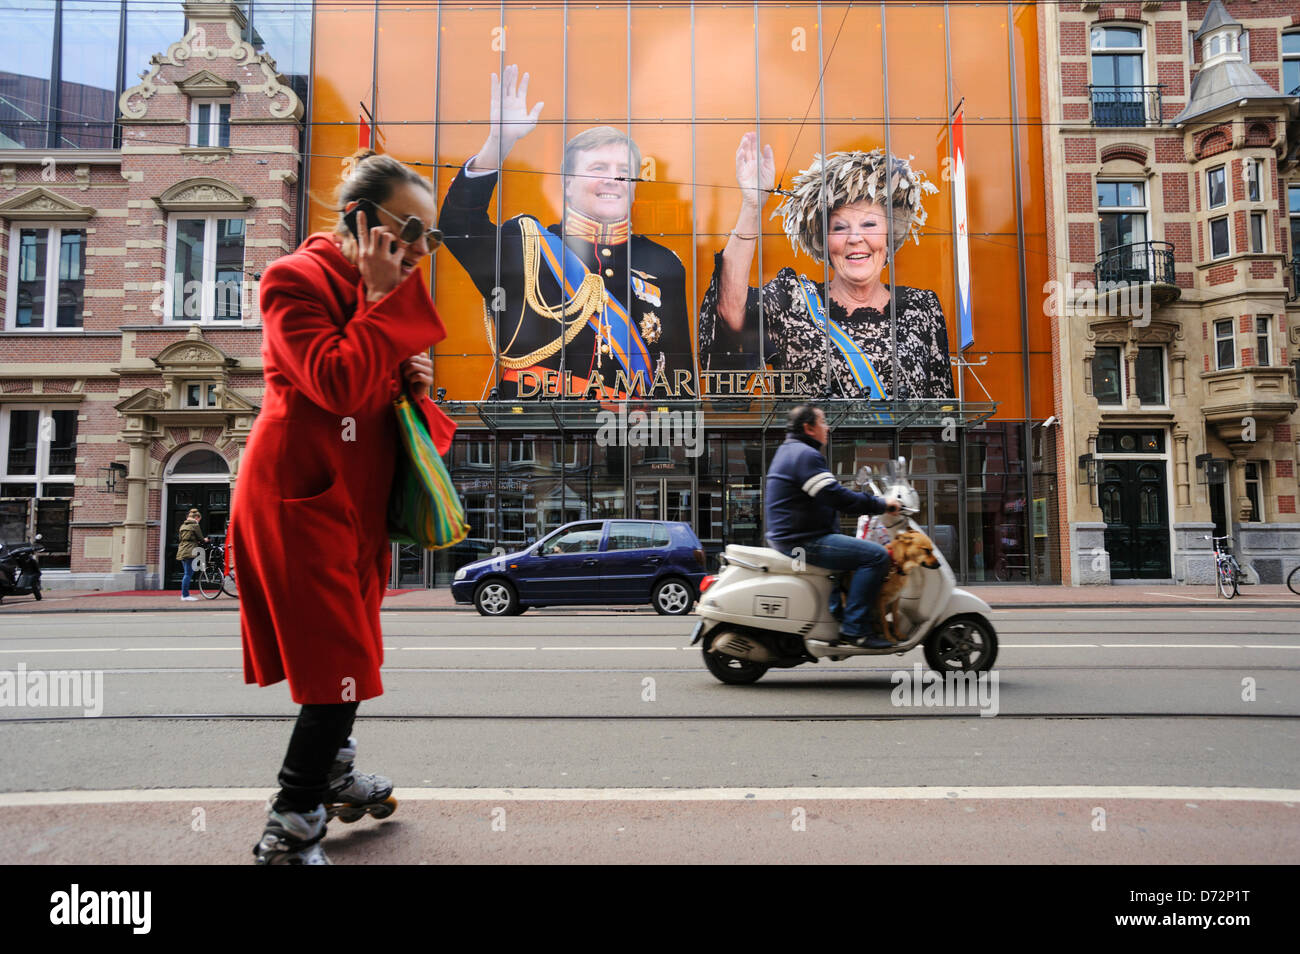 Netherlands, Amsterdam, 27 April 2013.A young woman on roller skates passes by portraits of Queen Beatrix of the Netherlands and her son, Crown Prince Willem-Alexander, displayed in front of a theatre in Amsterdam, Saturday, 27 April, 2013. The Netherlands is preparing for Queen's Day on April 30, which will also mark the abdication of Queen Beatrix and the investiture of her eldest son Willem-Alexander. Alamy Live News Stock Photo